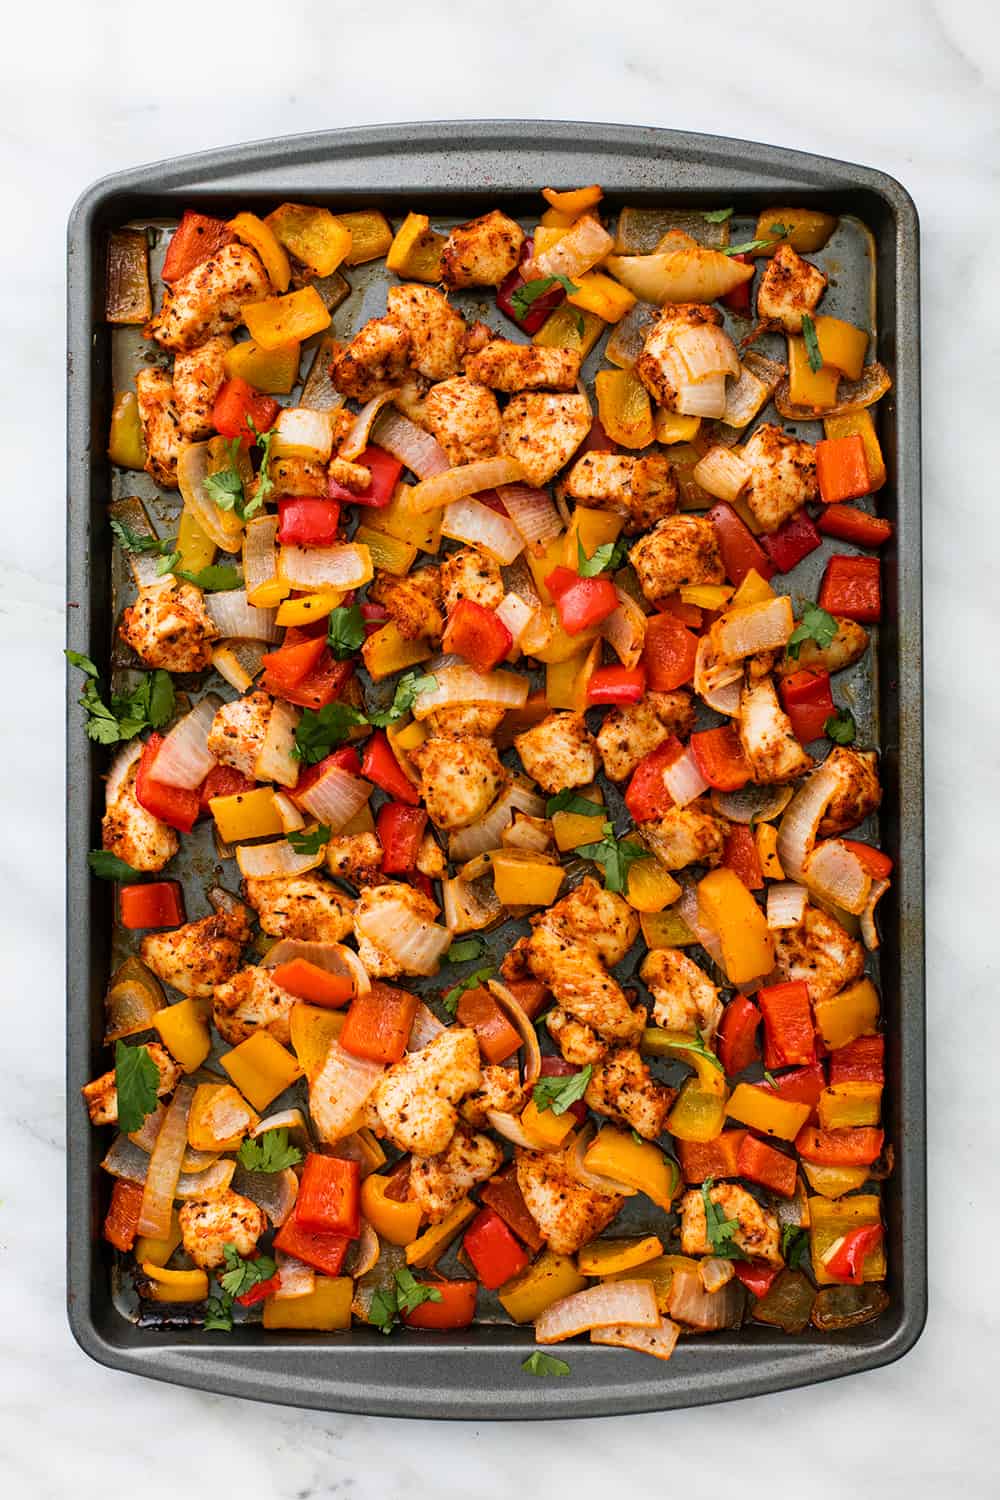 Areal view of a sheet pan cajun chicken.